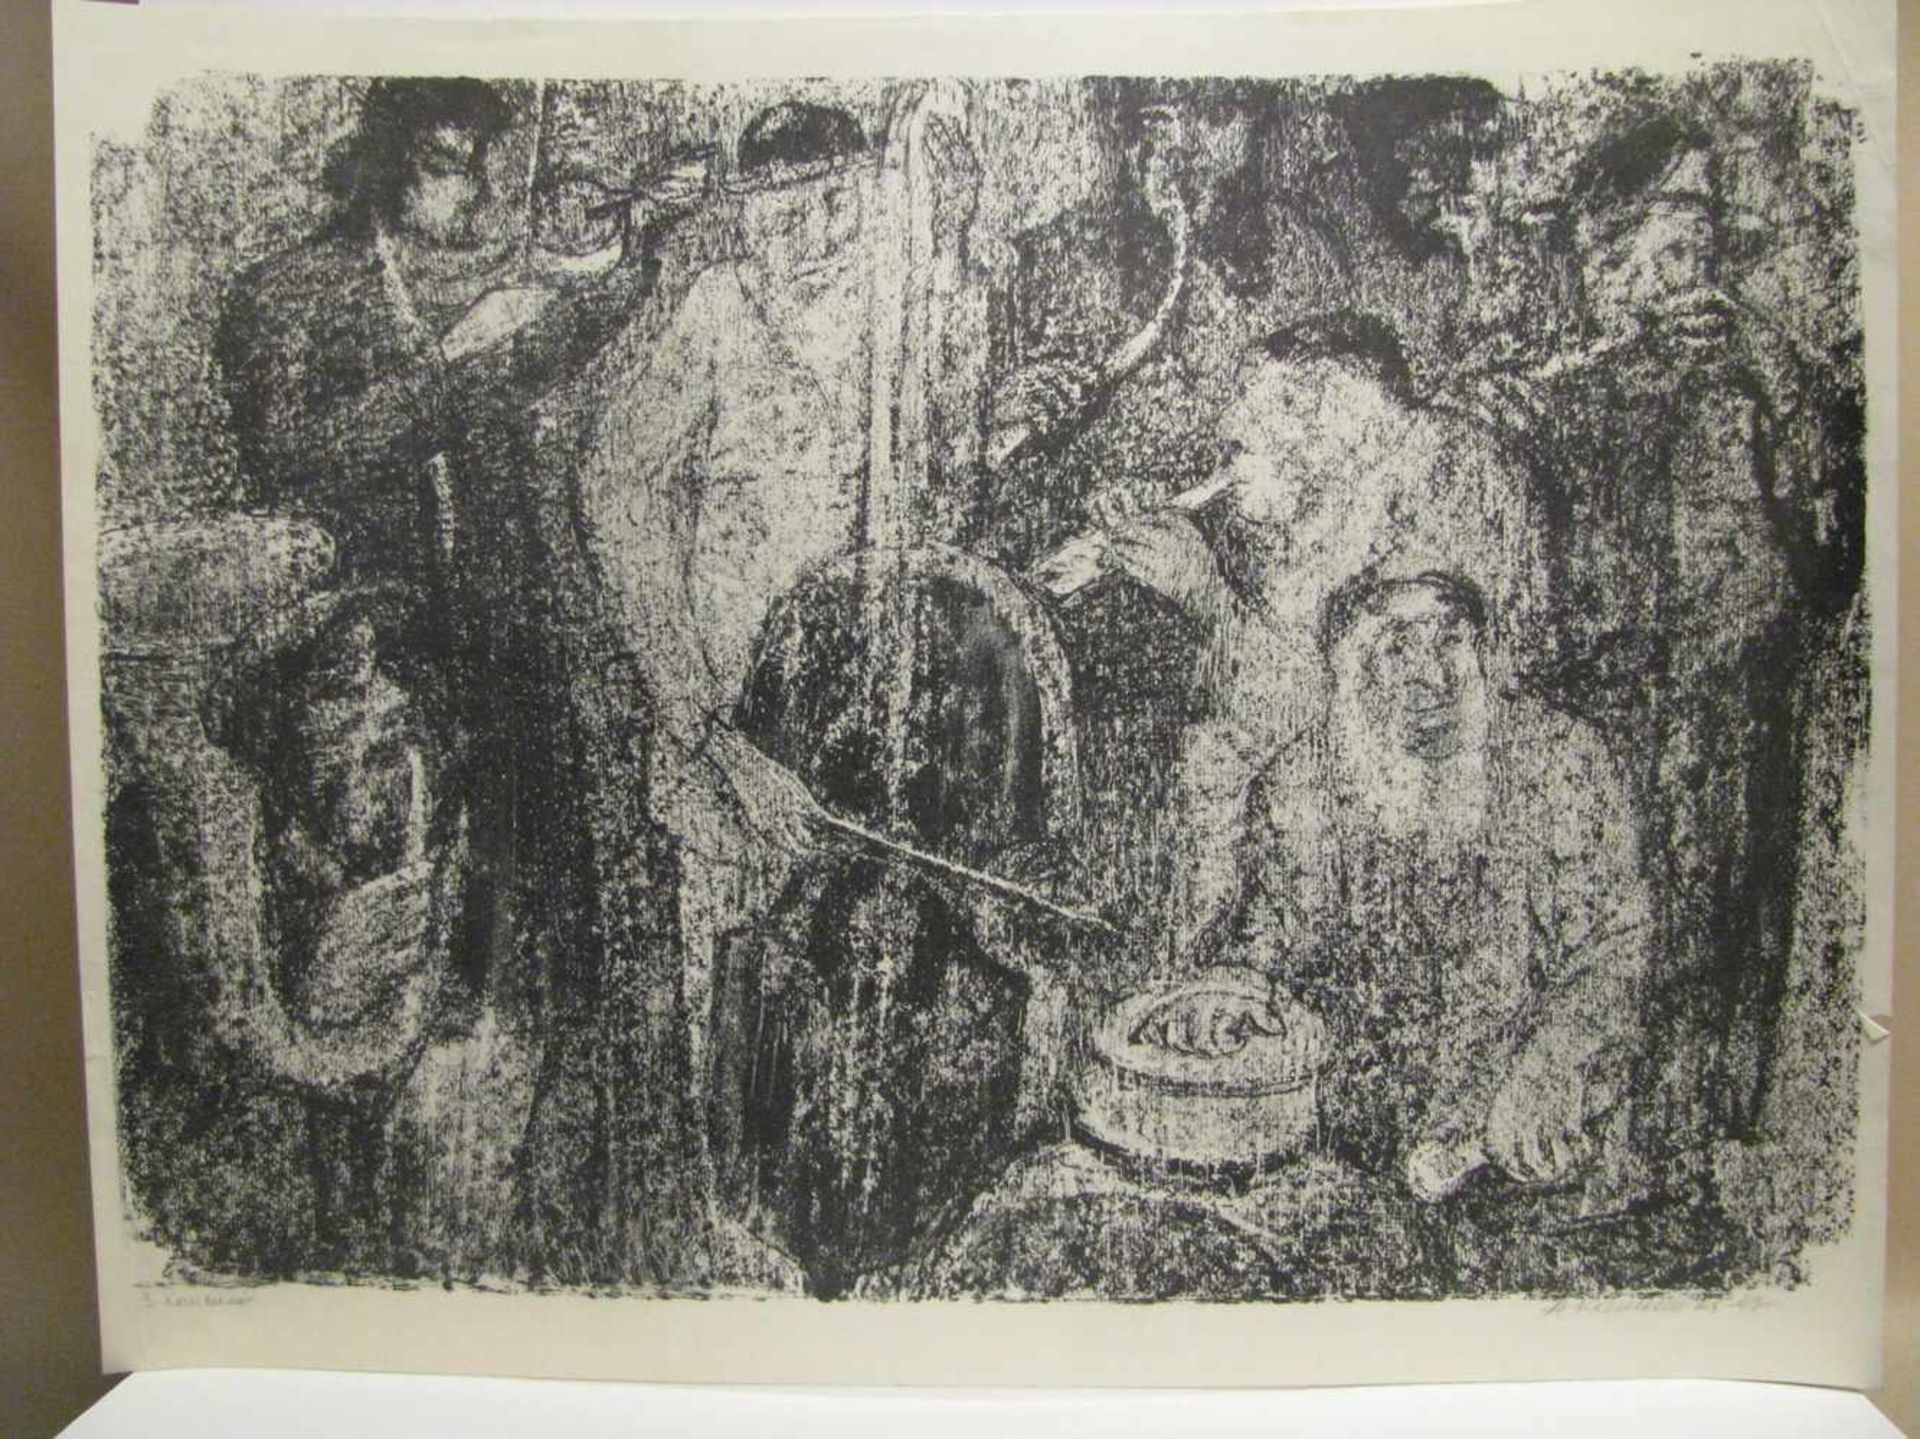 Unles.sign., "Musikanten", 11 Lithografien, 42 x 60 cm, o.R.- - -19.00 % buyer's premium on the